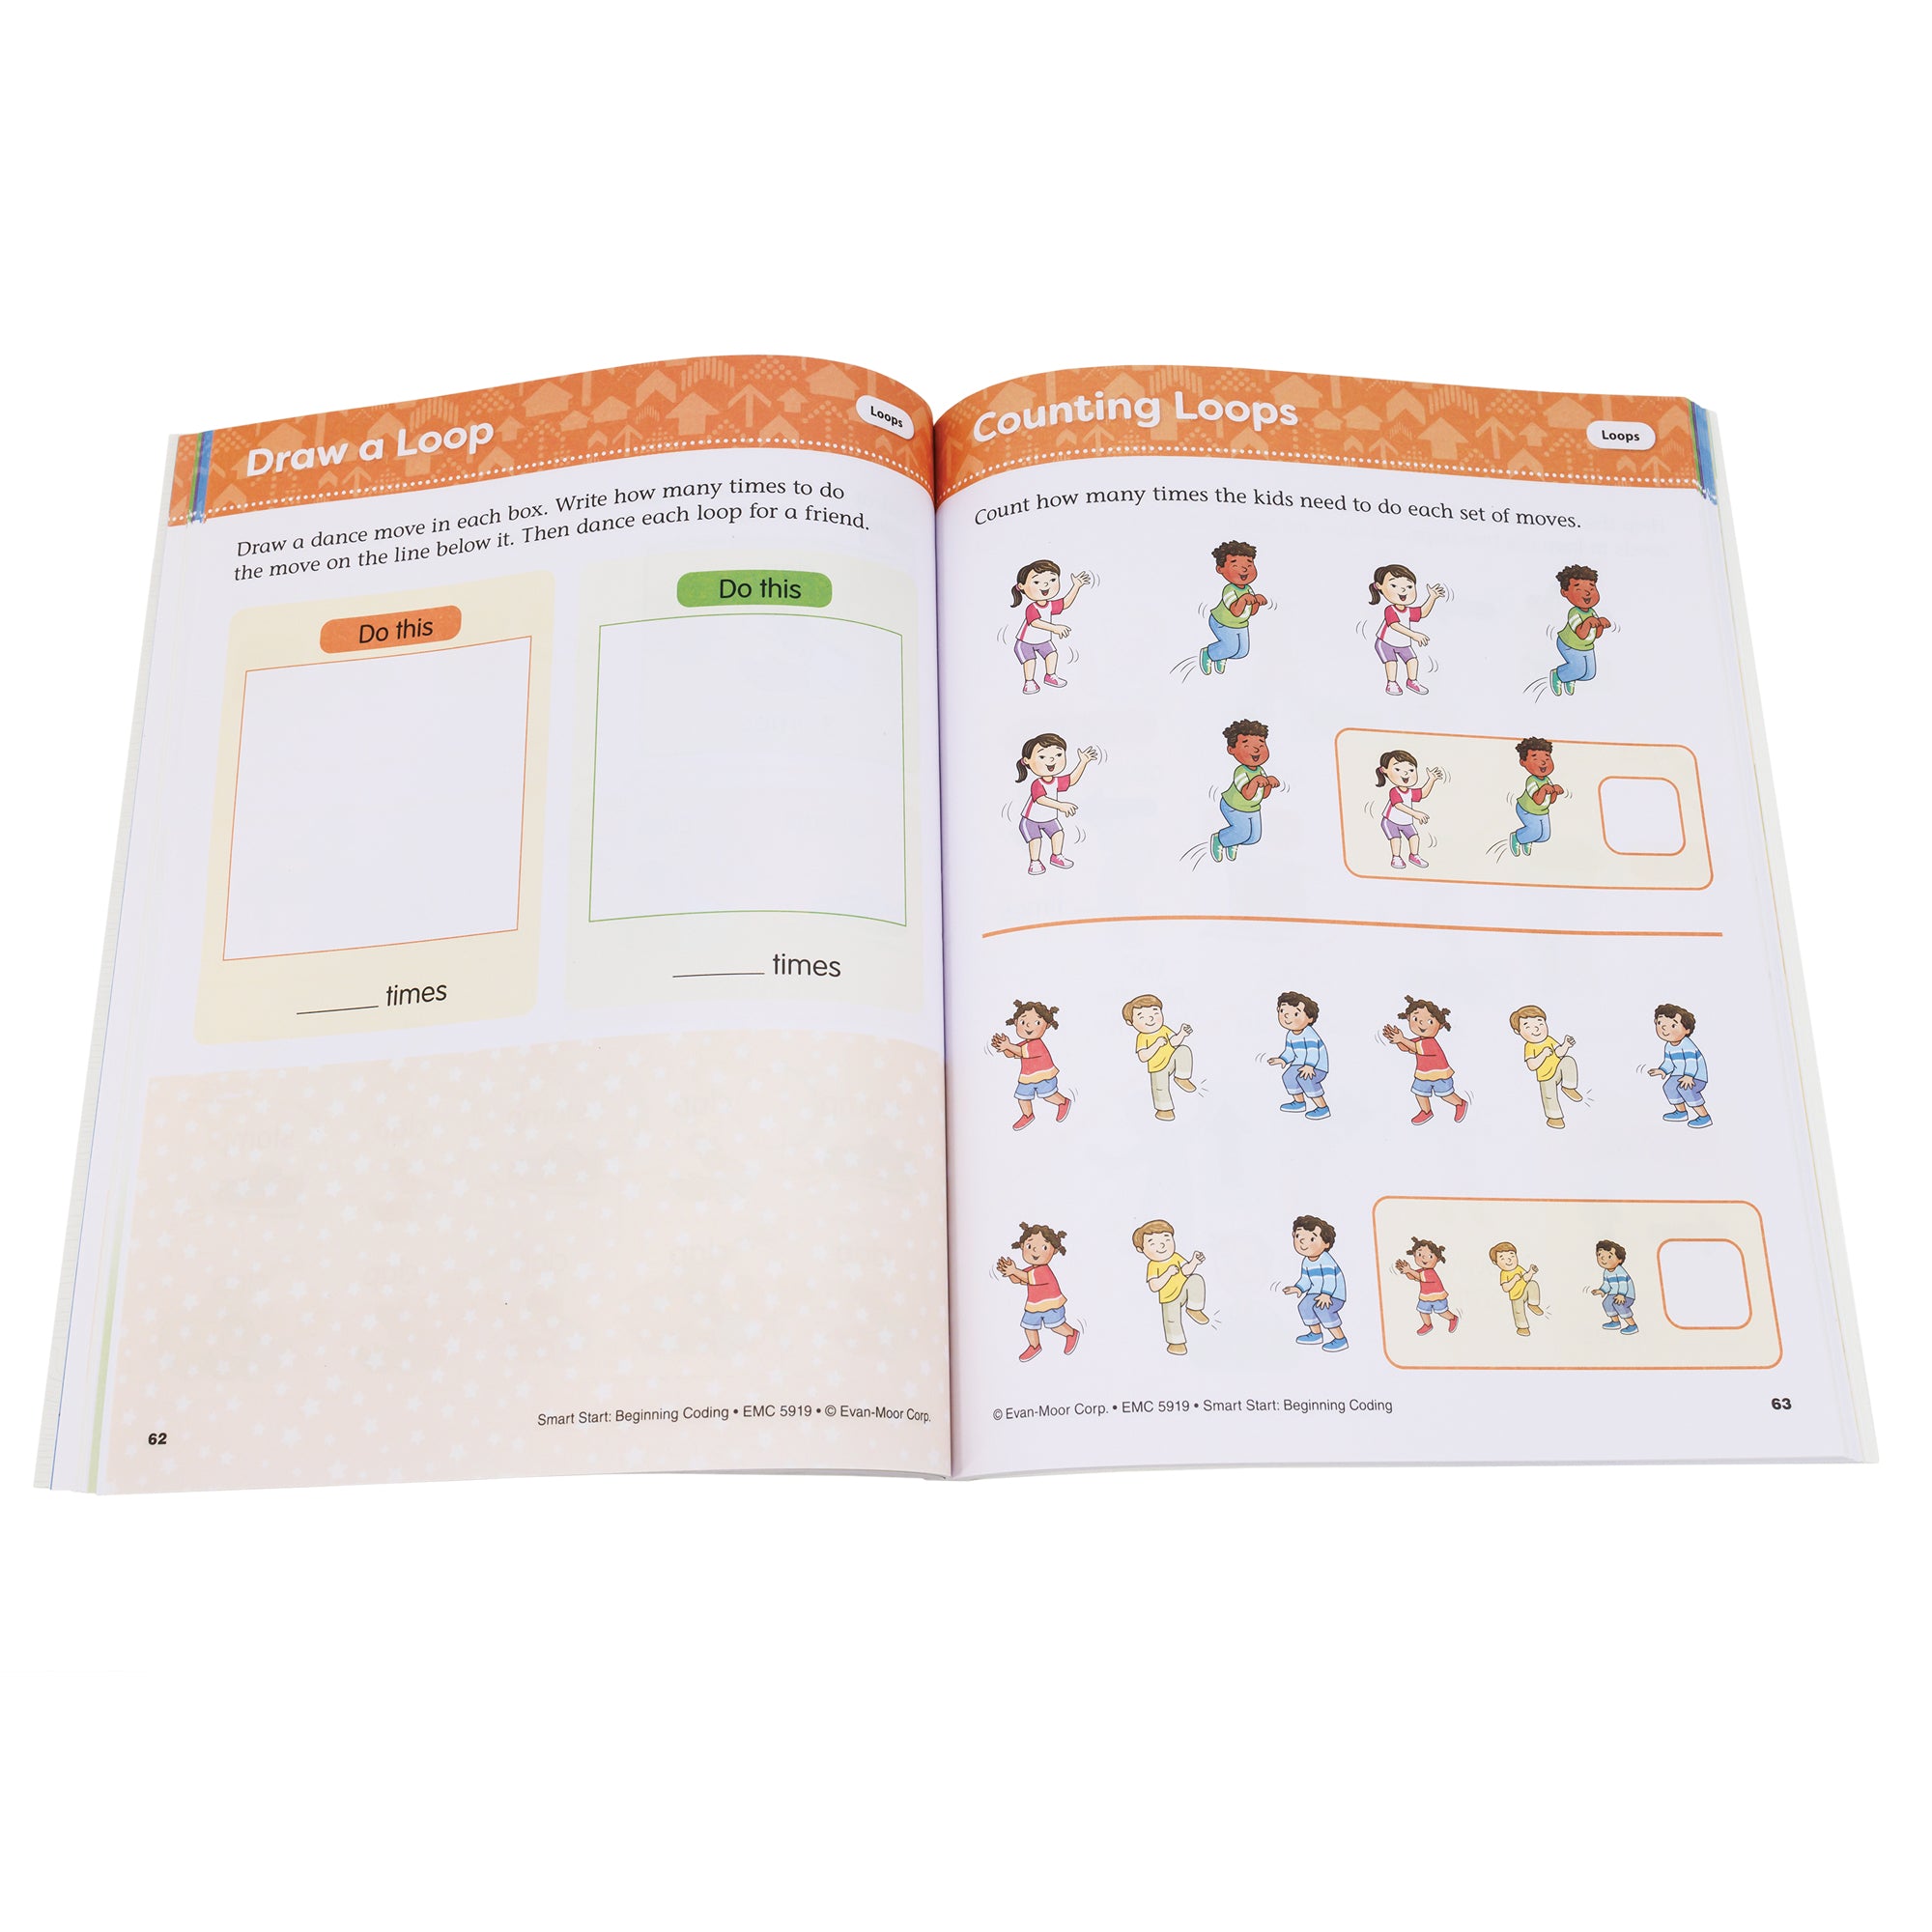 Smart Start Beginning Coding book open to show inside pages. The white pages have an orange top border with titles inside. The left page, titled “Draw a Loop,” has 2 empty boxes for you to draw a dance move in each, then has you “loop” the dance move a certain number of times. The right page, titled “Counting Loops,” shows illustrations of children doing dance moves. You are to count how many times the kids loop each dance move.